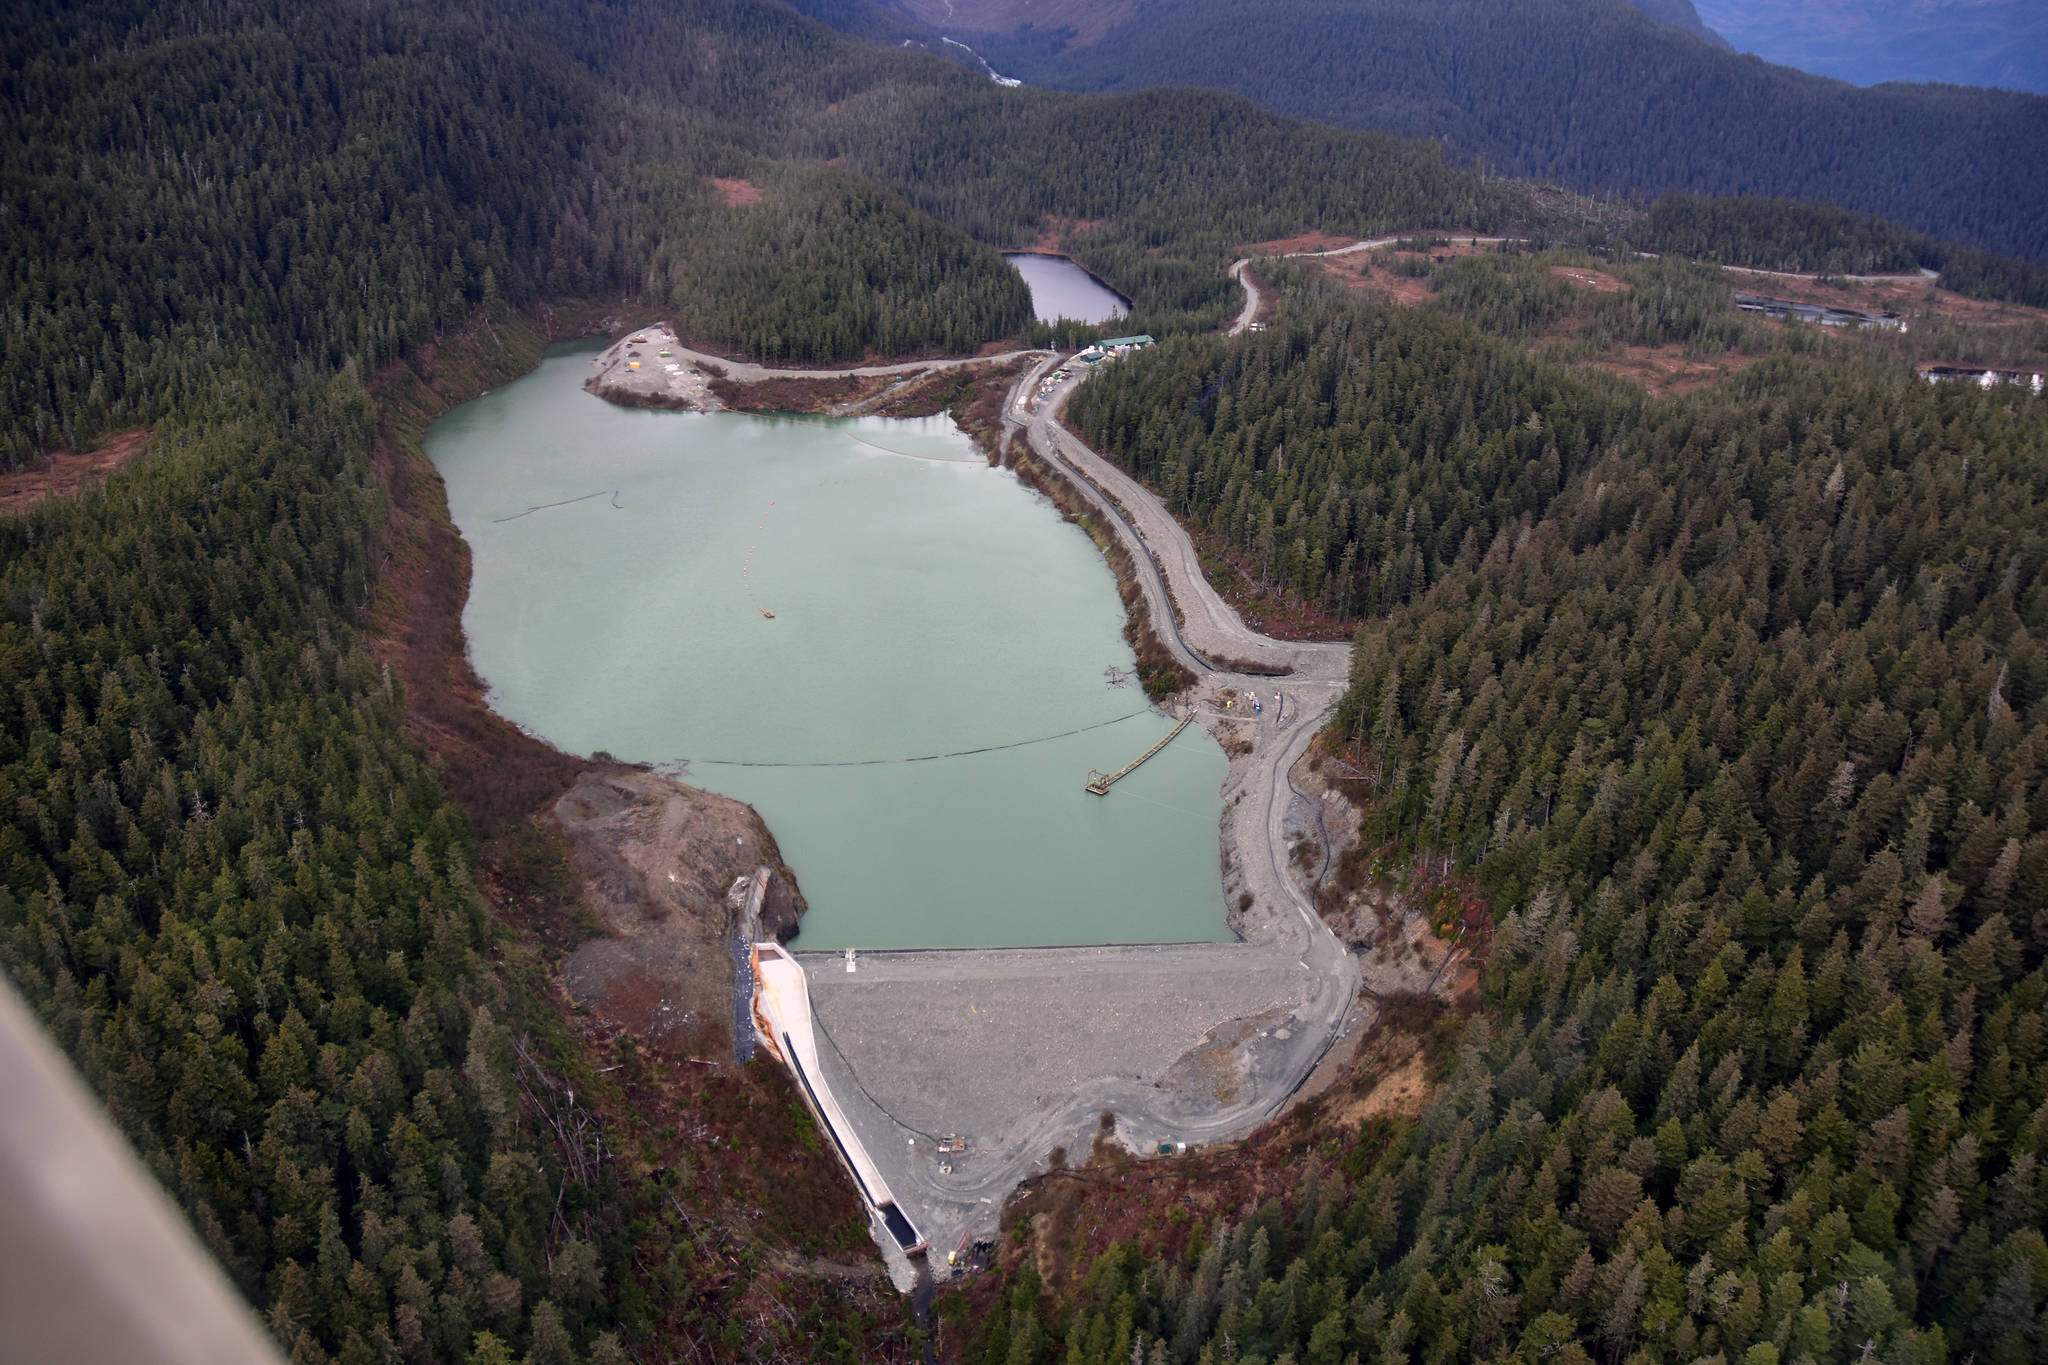 Coeur Alaska will likely be able to expand their facilities at the Kensington Gold Mine including the Tailing Treatment Facility, seen here in this October 2019 photo, after the U.S. Forest Service announced it intends to approve the company’s proposal to extend the mine's life by 10 years. Operations were expected to end in 2023 under a plan approved in 2005. (Peter Segall / Juneau Empire File)